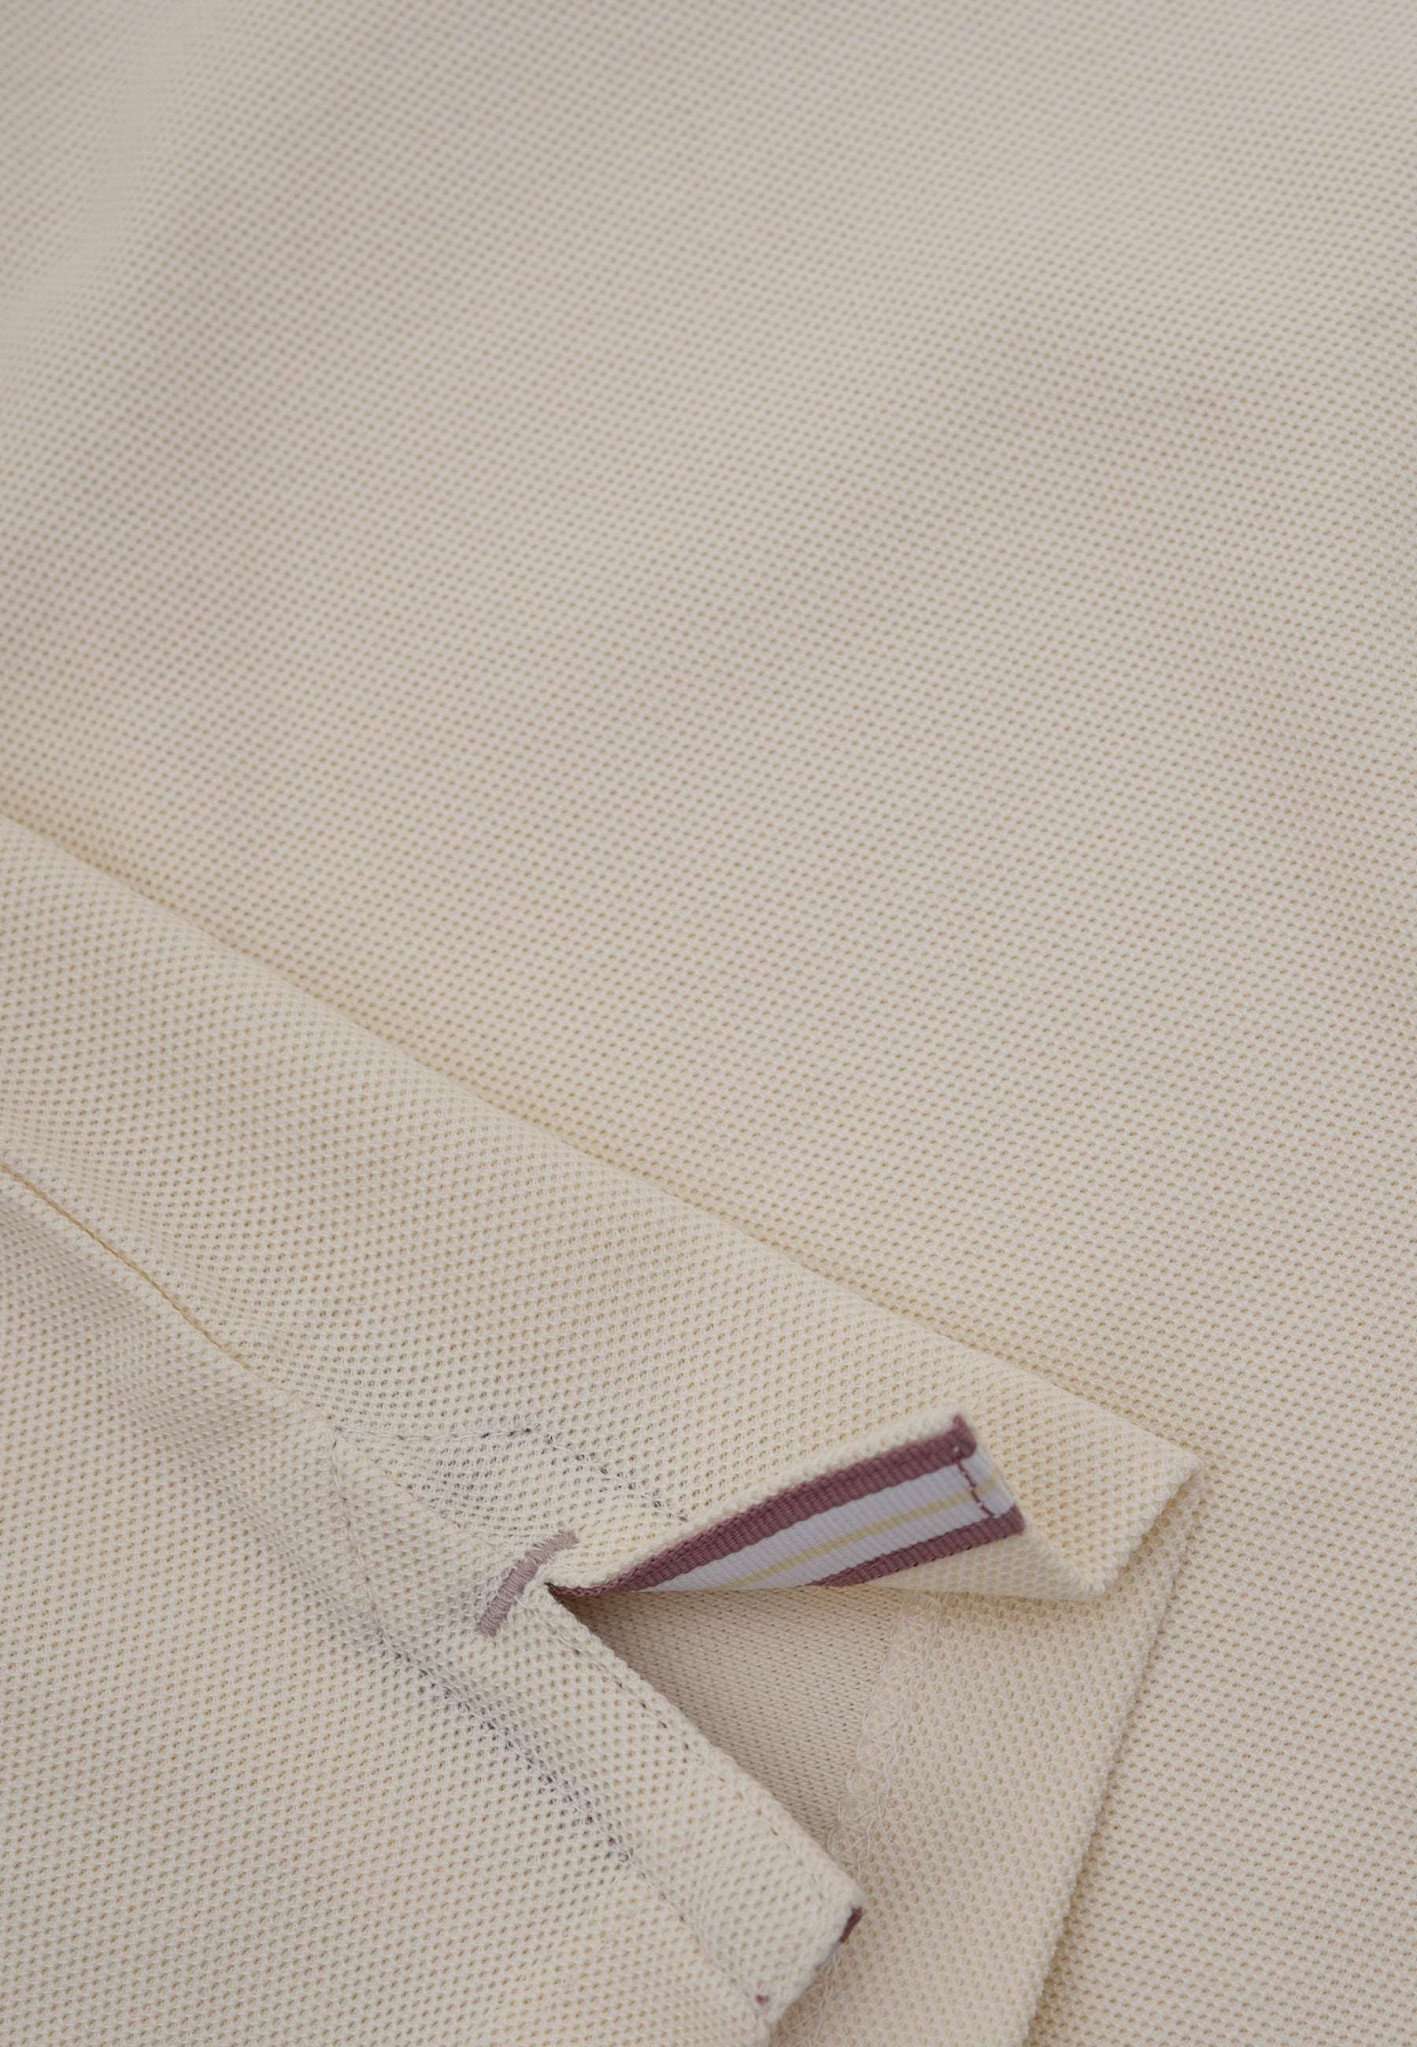 Polo Embroidery in Offwhite Polos Colours and Sons   